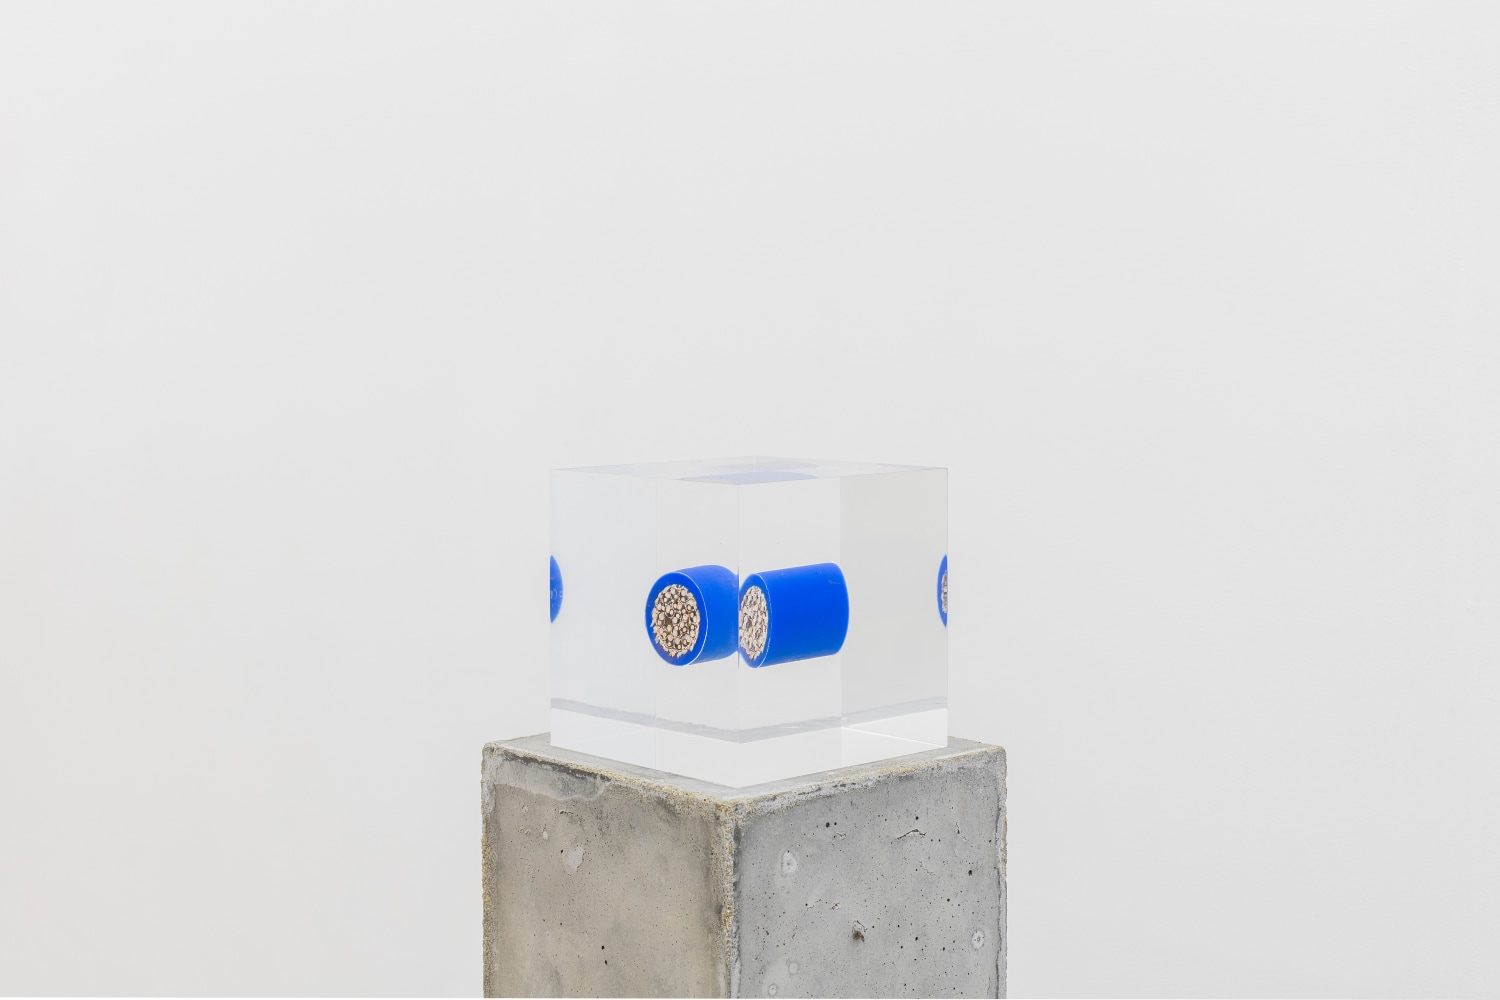 Nina Canell

Brief Syllable (Oceanic)

2016

Subterranean signalling cable, acrylic, concrete

4 x 4 x 4 inches (10 x 10 x 10 cm)

39 3/8 x 5 1/8 x 5 1/8 inches (100 x 13 x 13 cm) pedestal

43 3/8 x 5 1/8 x 5 1/8 inches (110 x 13 x 13 cm) overall

NC 131

&amp;nbsp;

INQUIRE